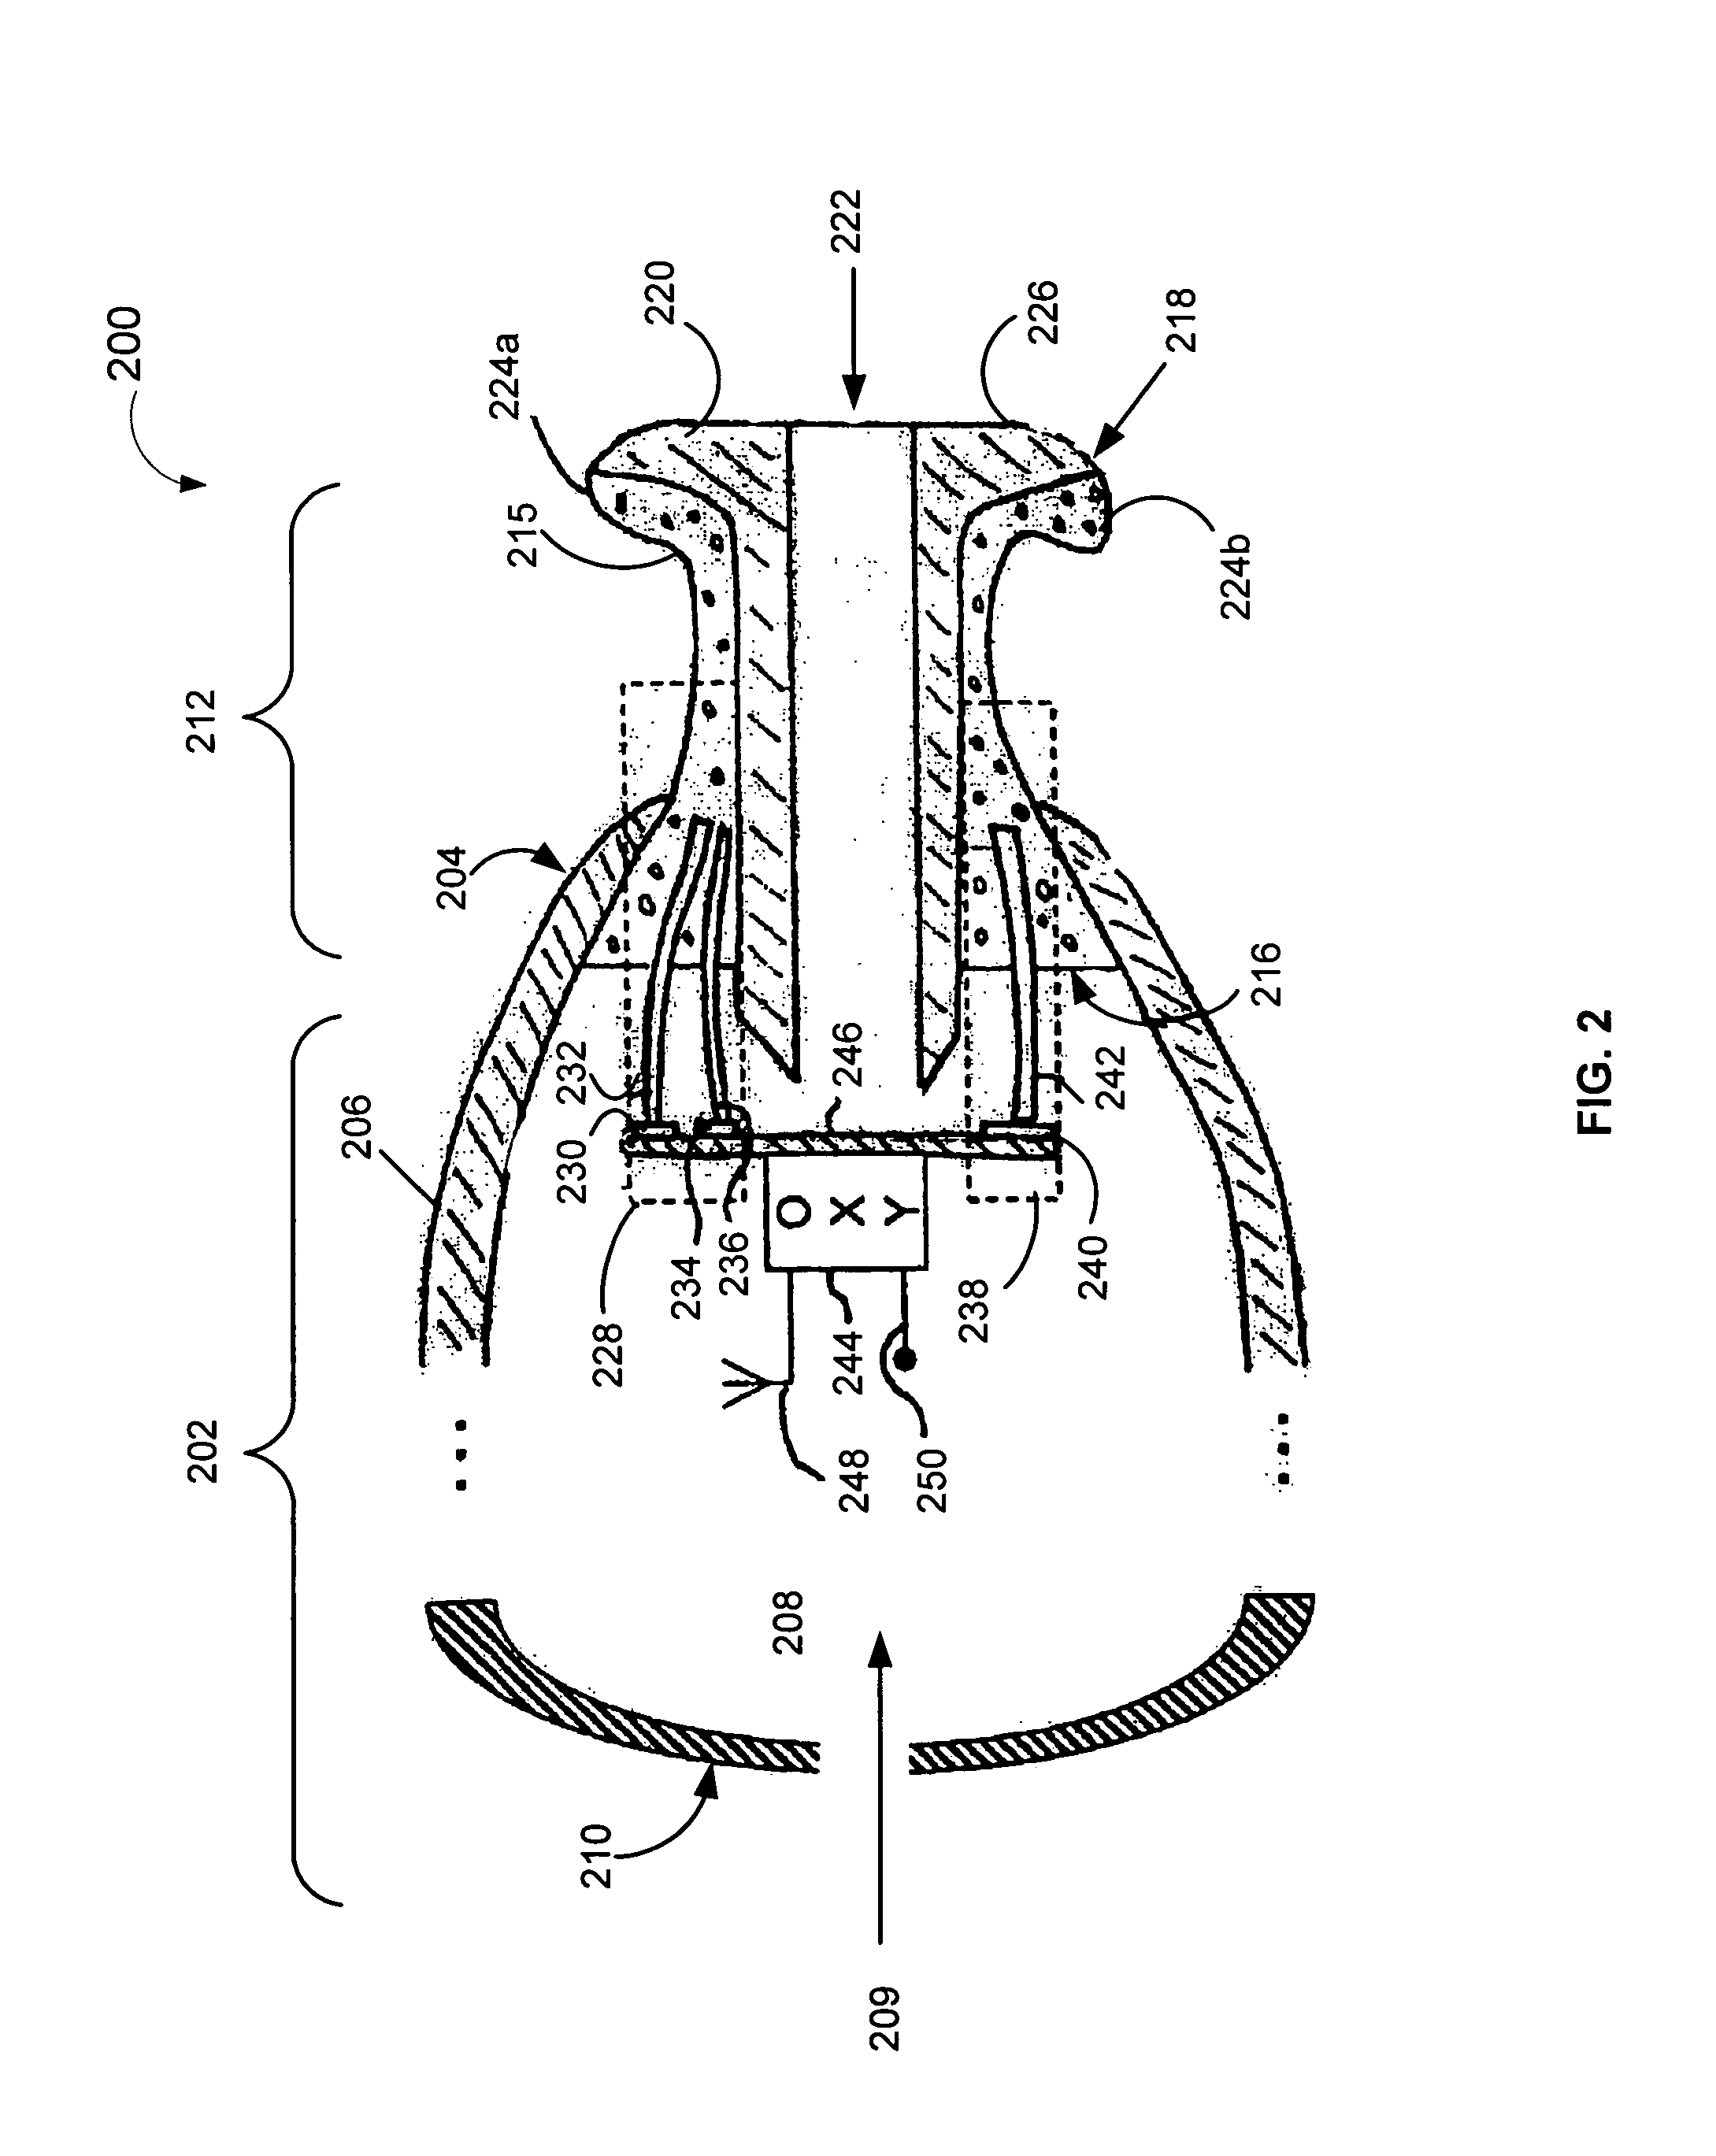 Pulse oximetry methods and apparatus for use within an auditory canal